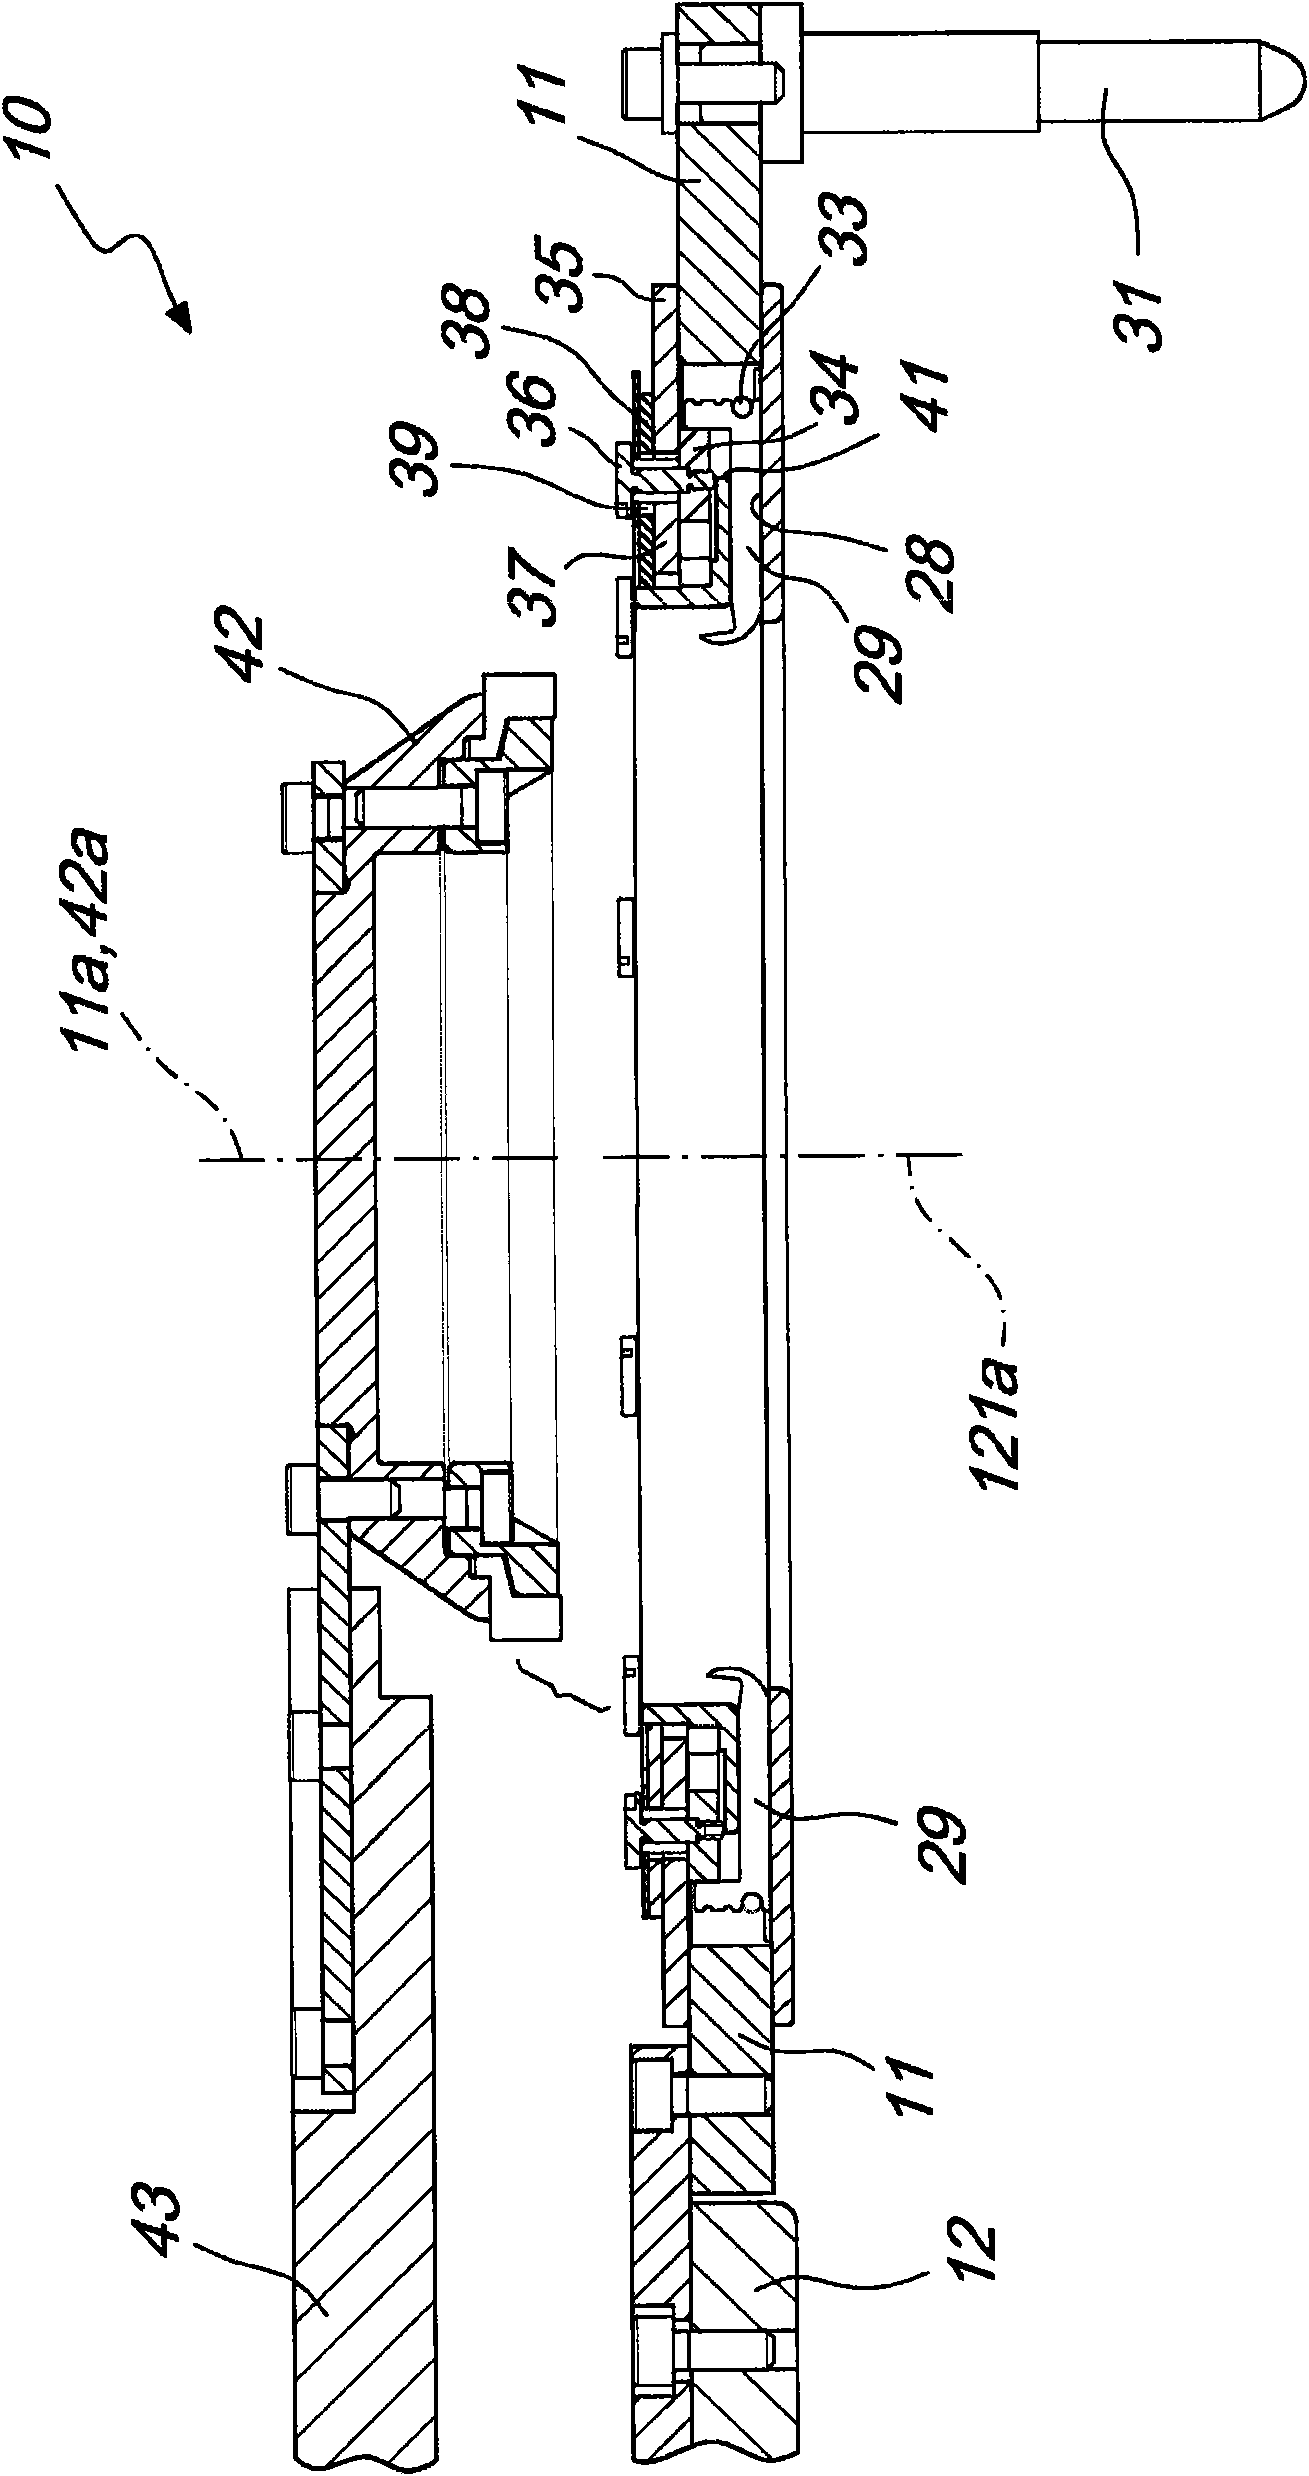 Pick-up device for picking up a tubular knitted article from a circular knitting machine for hosiery or the like and for transferring it to a unit adapted to perform additional work on the article